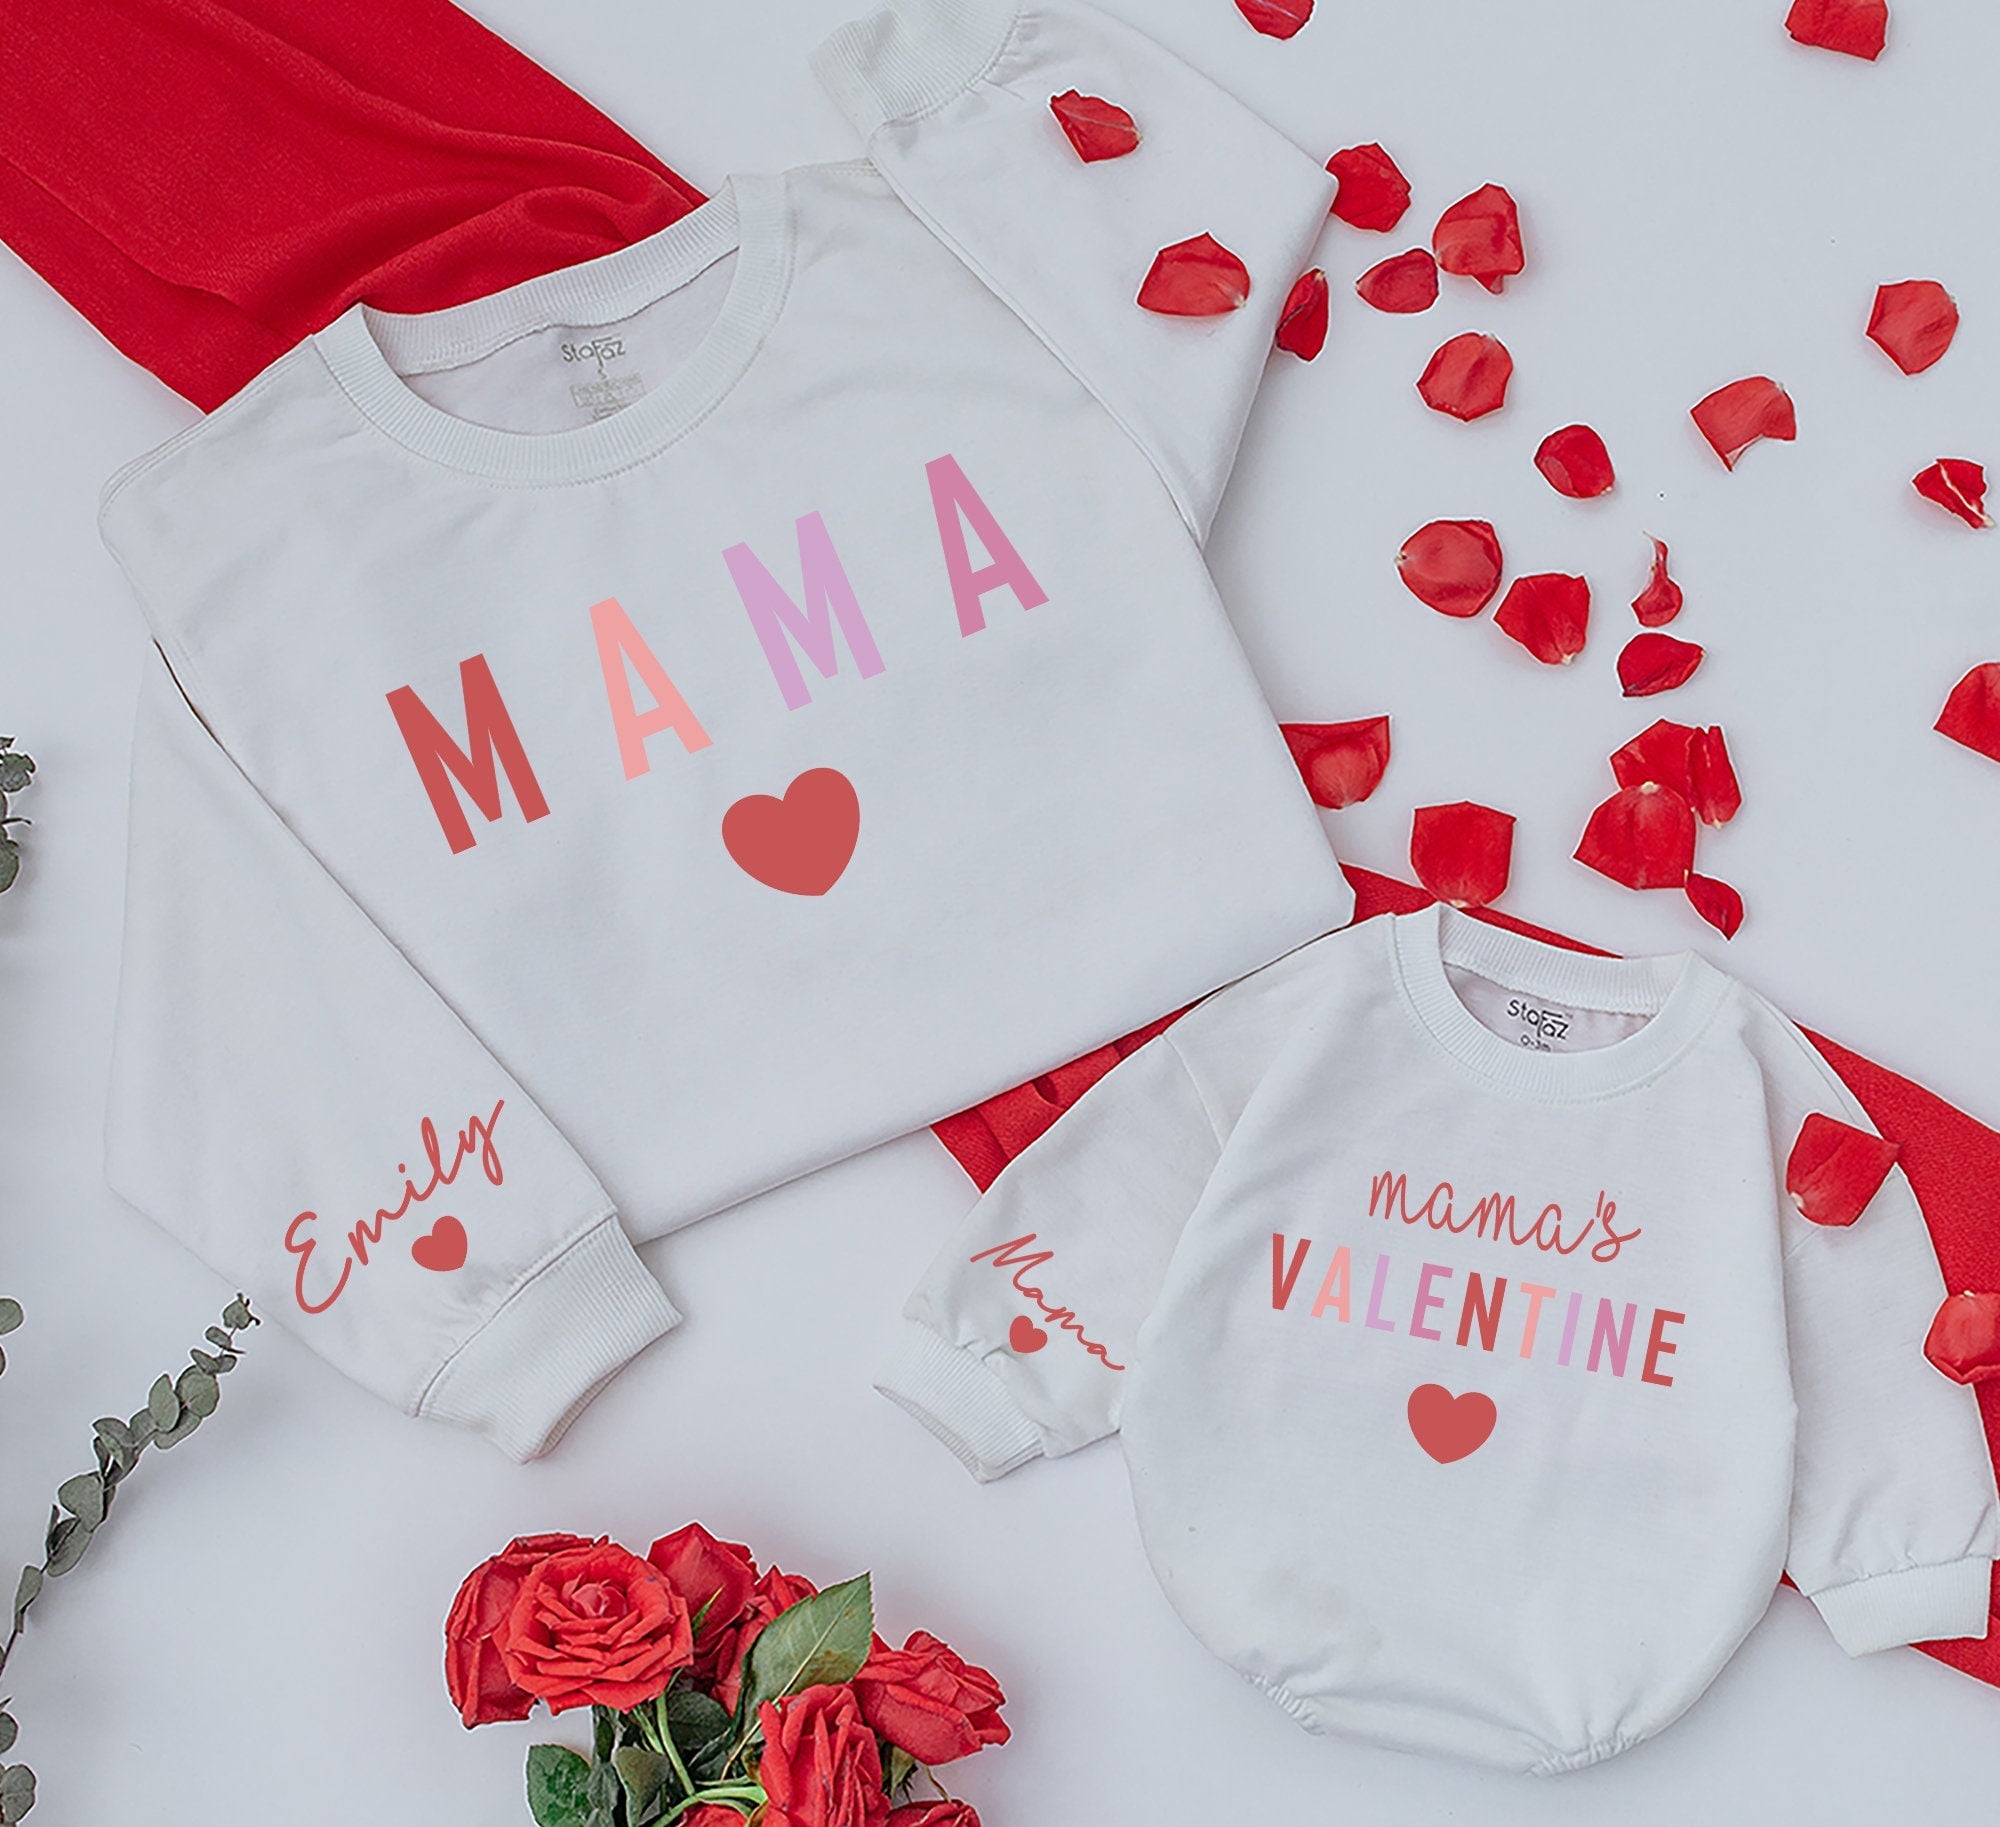 Mom and Baby Valentine's Day Outfit - Cozy Matching Sweatshirts